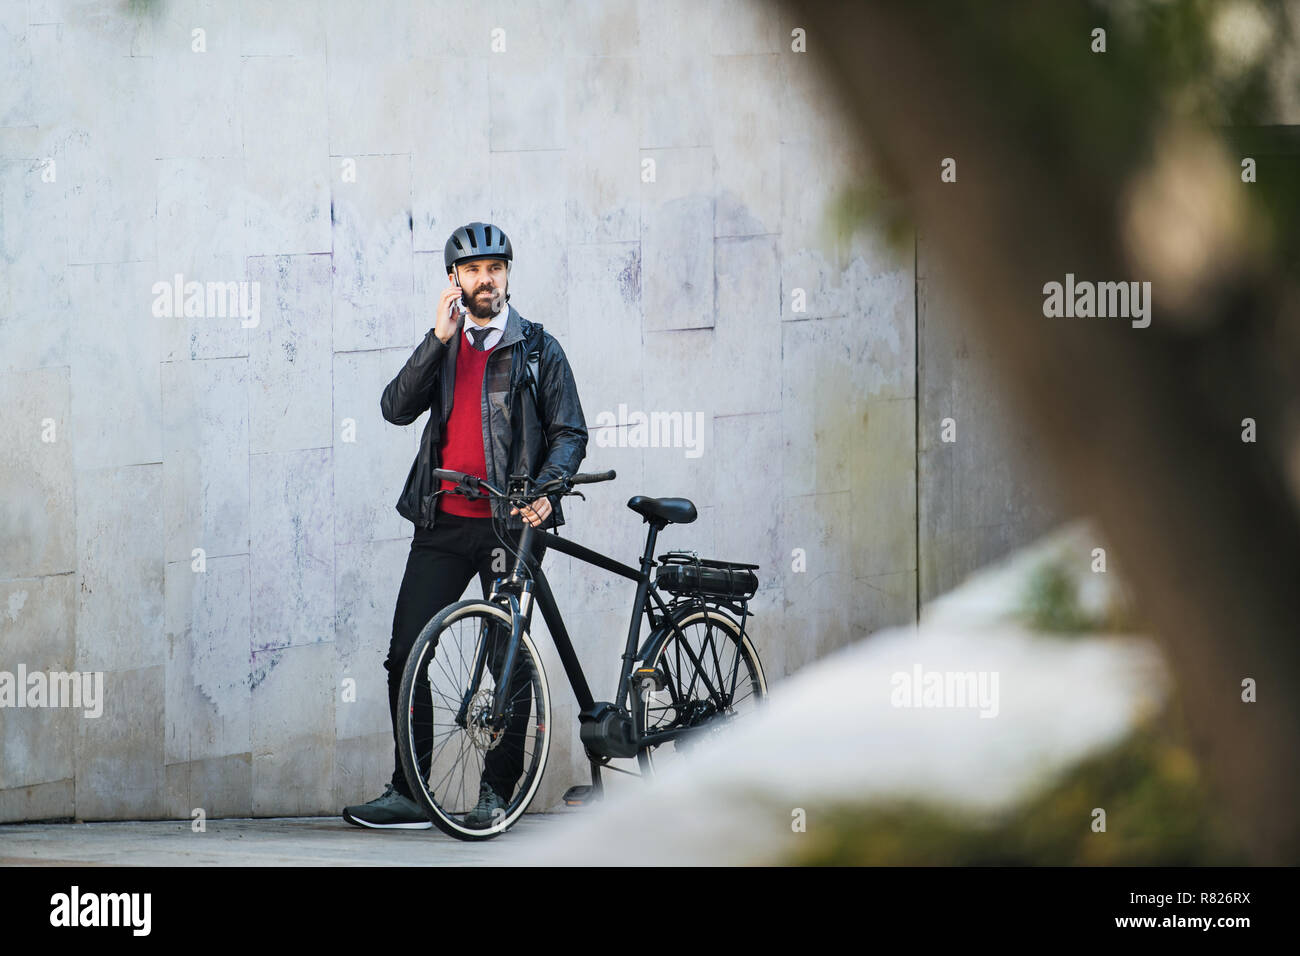 Businessman commuter with bicycle walking home from work in city, using smartphone. Stock Photo